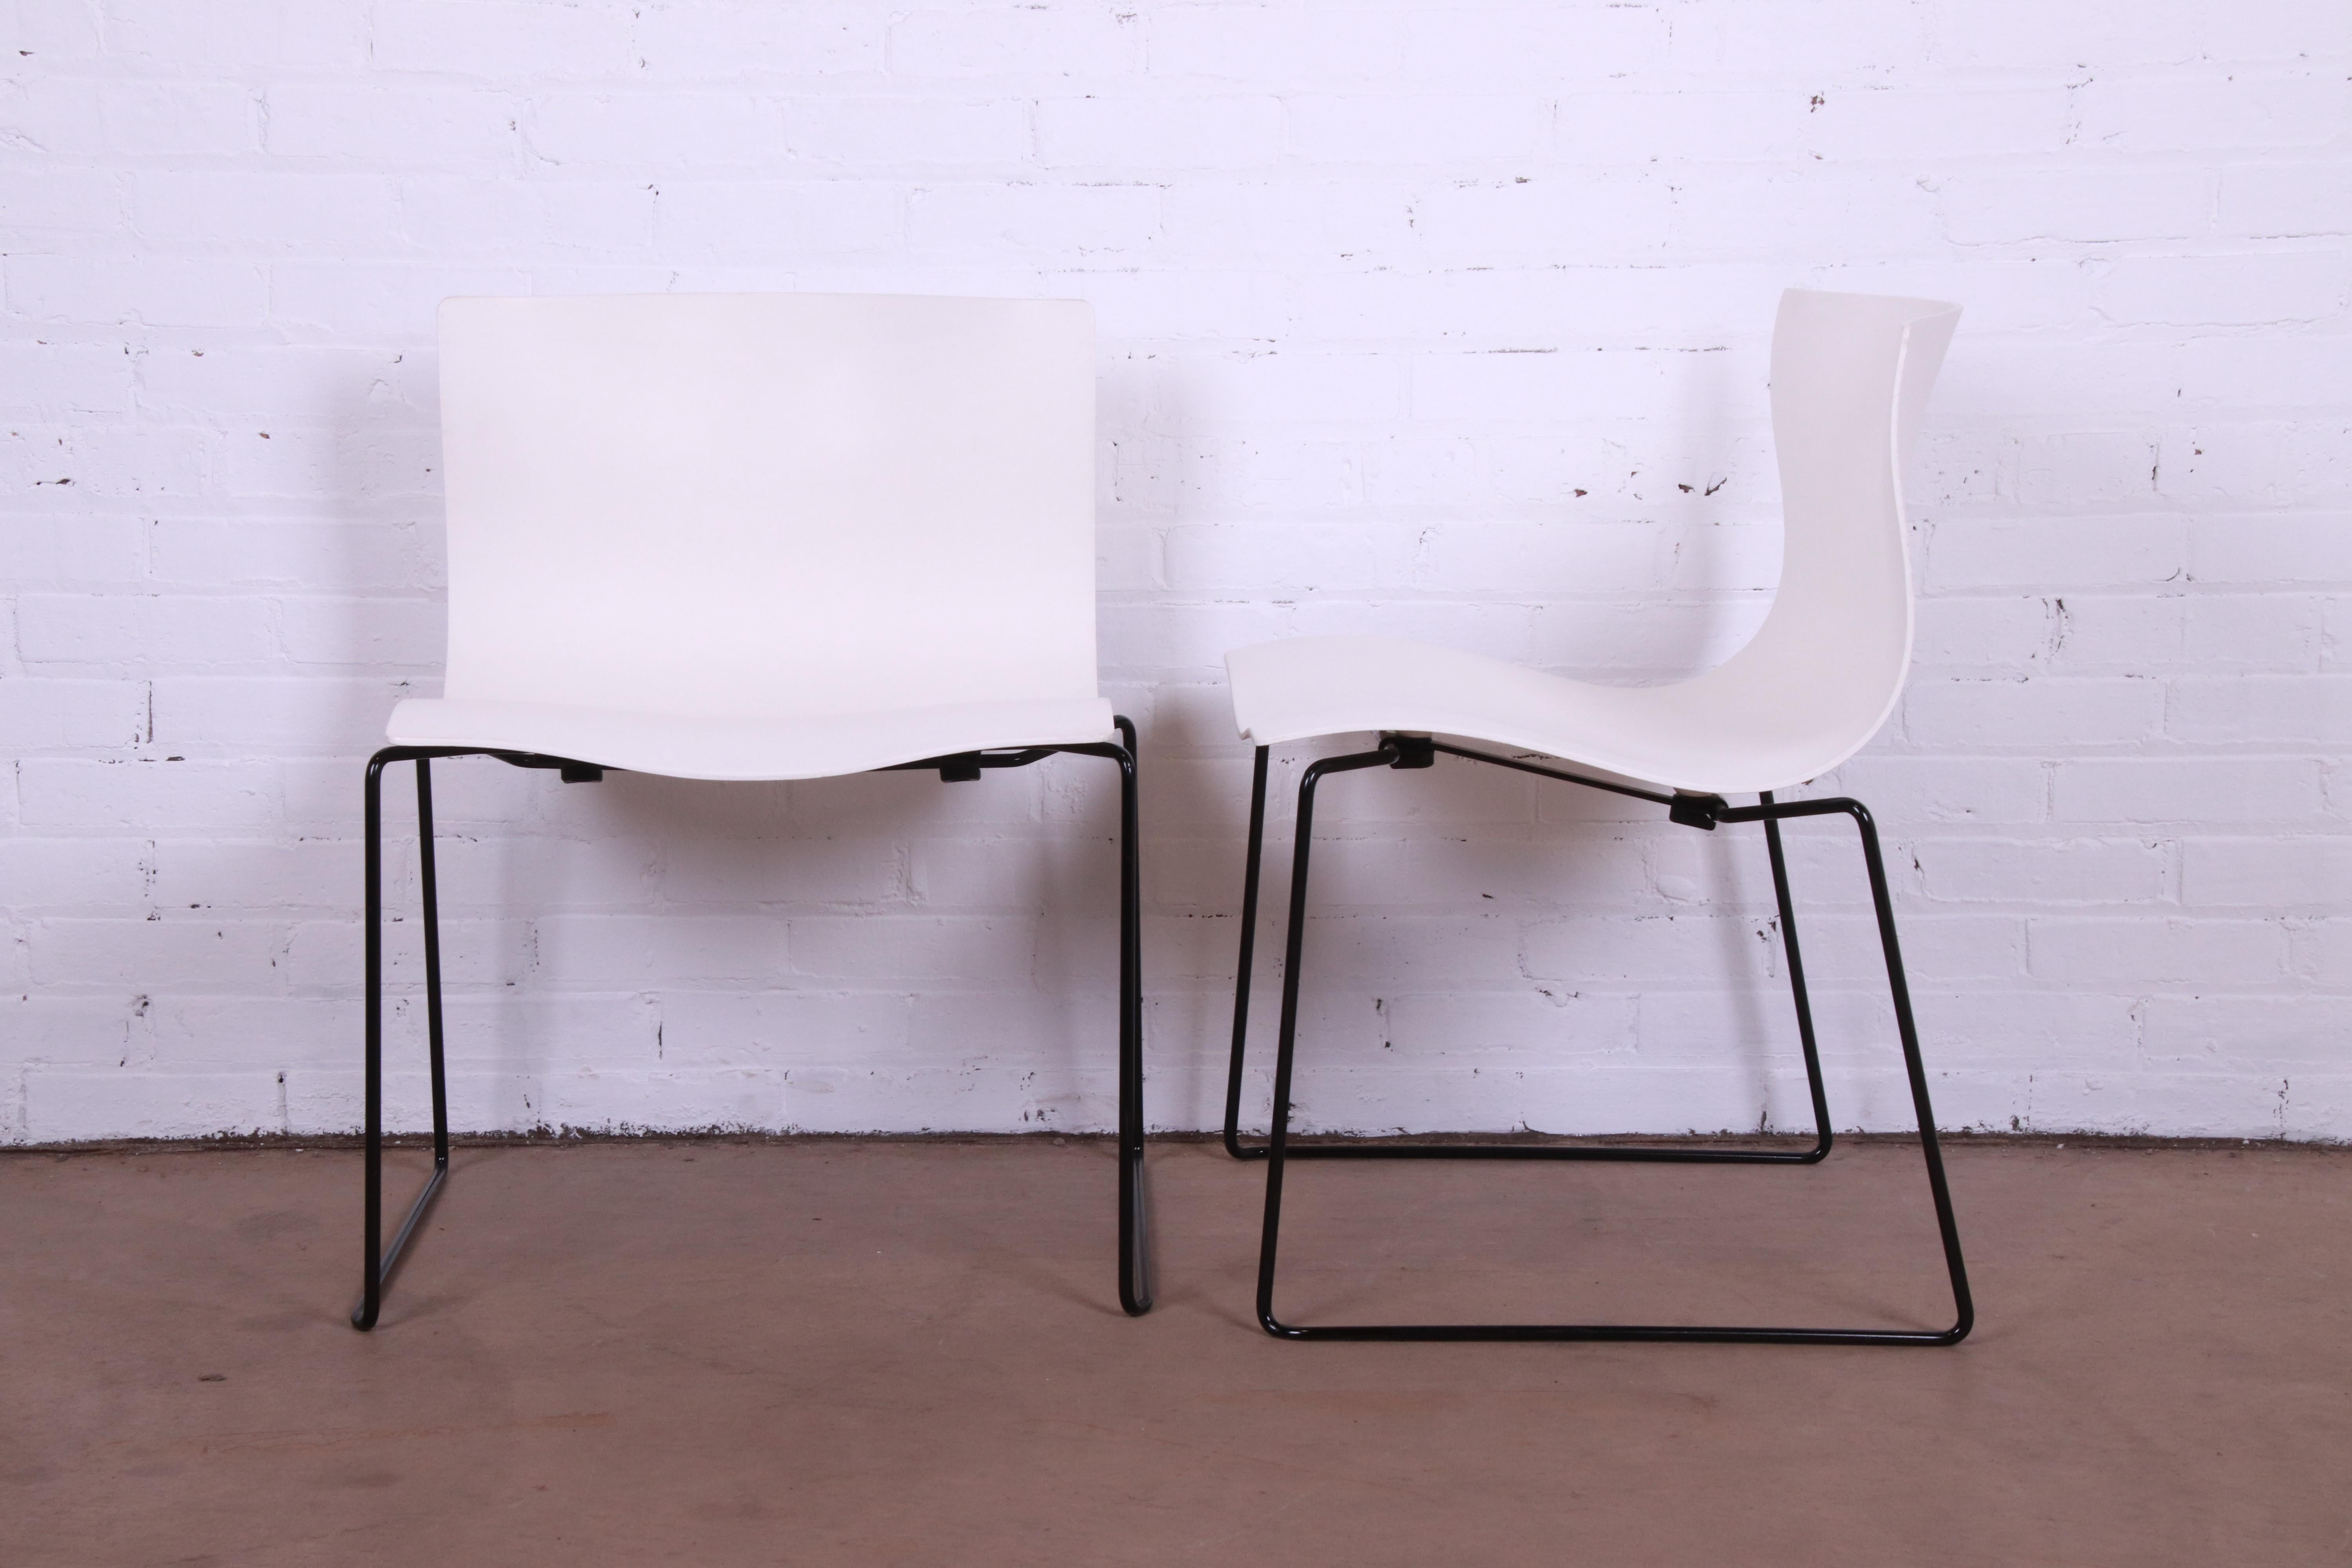 Steel Massimo Vignelli for Knoll Postmodern Handkerchief Chair, 29 Available For Sale